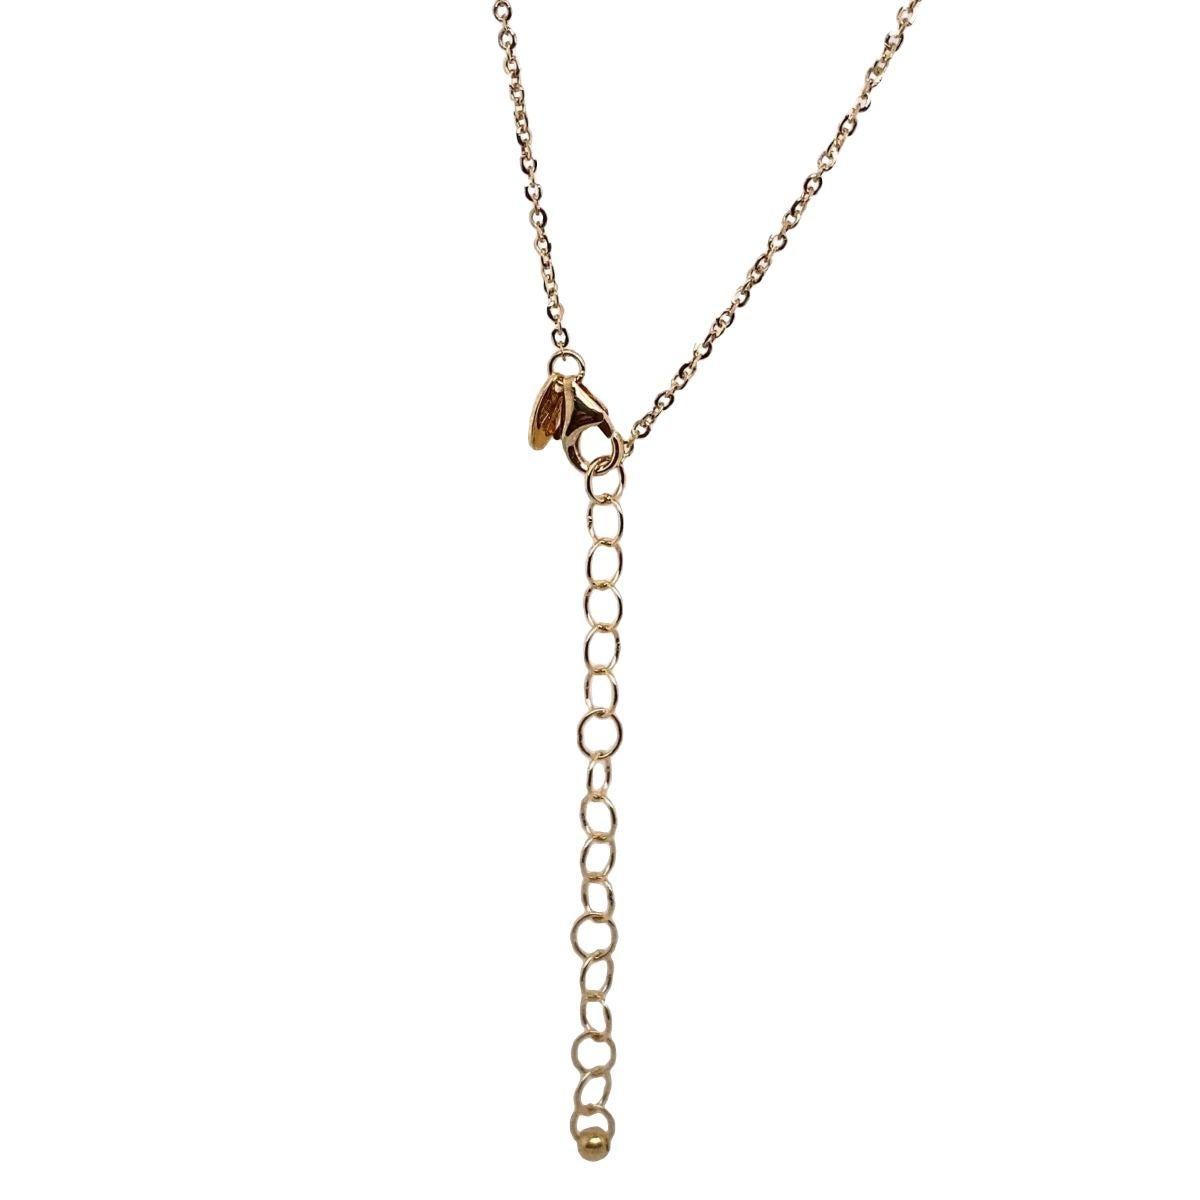 18ct Yellow Gold “Love” Necklace On 17″ 1/2 adjustable Chain.

Additional Information:
Total Weight : 3.2g
Chain Length: 17